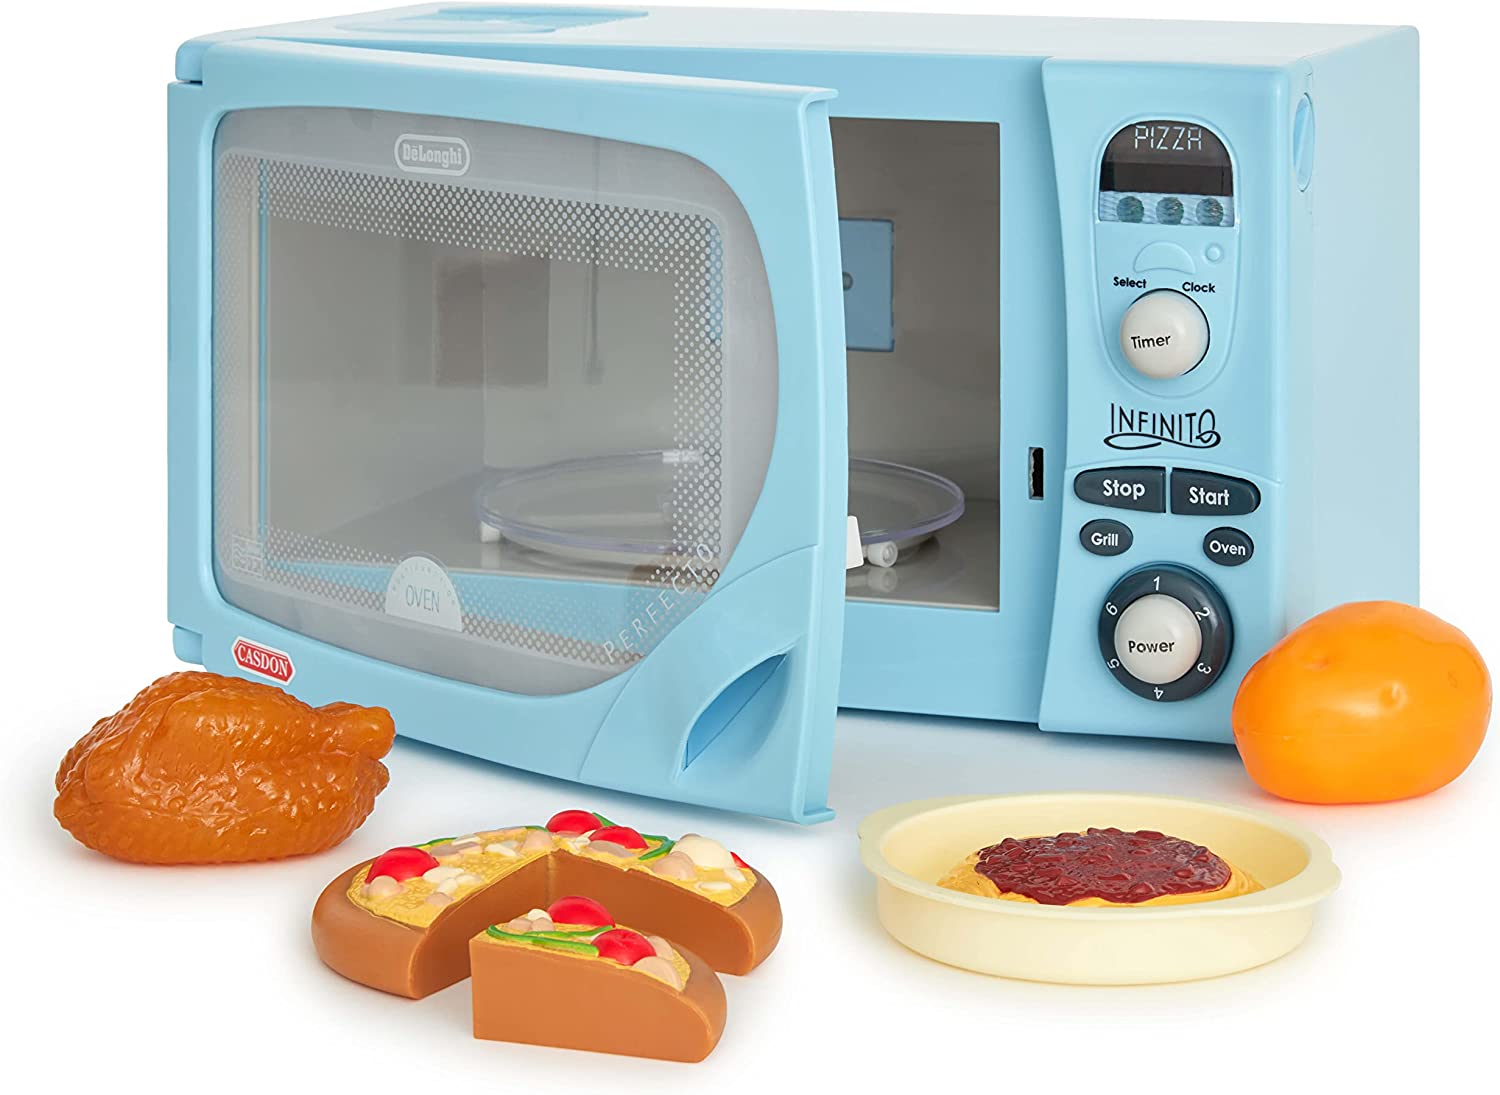  Casdon DeLonghi Microwave, Toy Replica Of DeLonghi's 'Infinito'  Microwave For Children Aged 3+